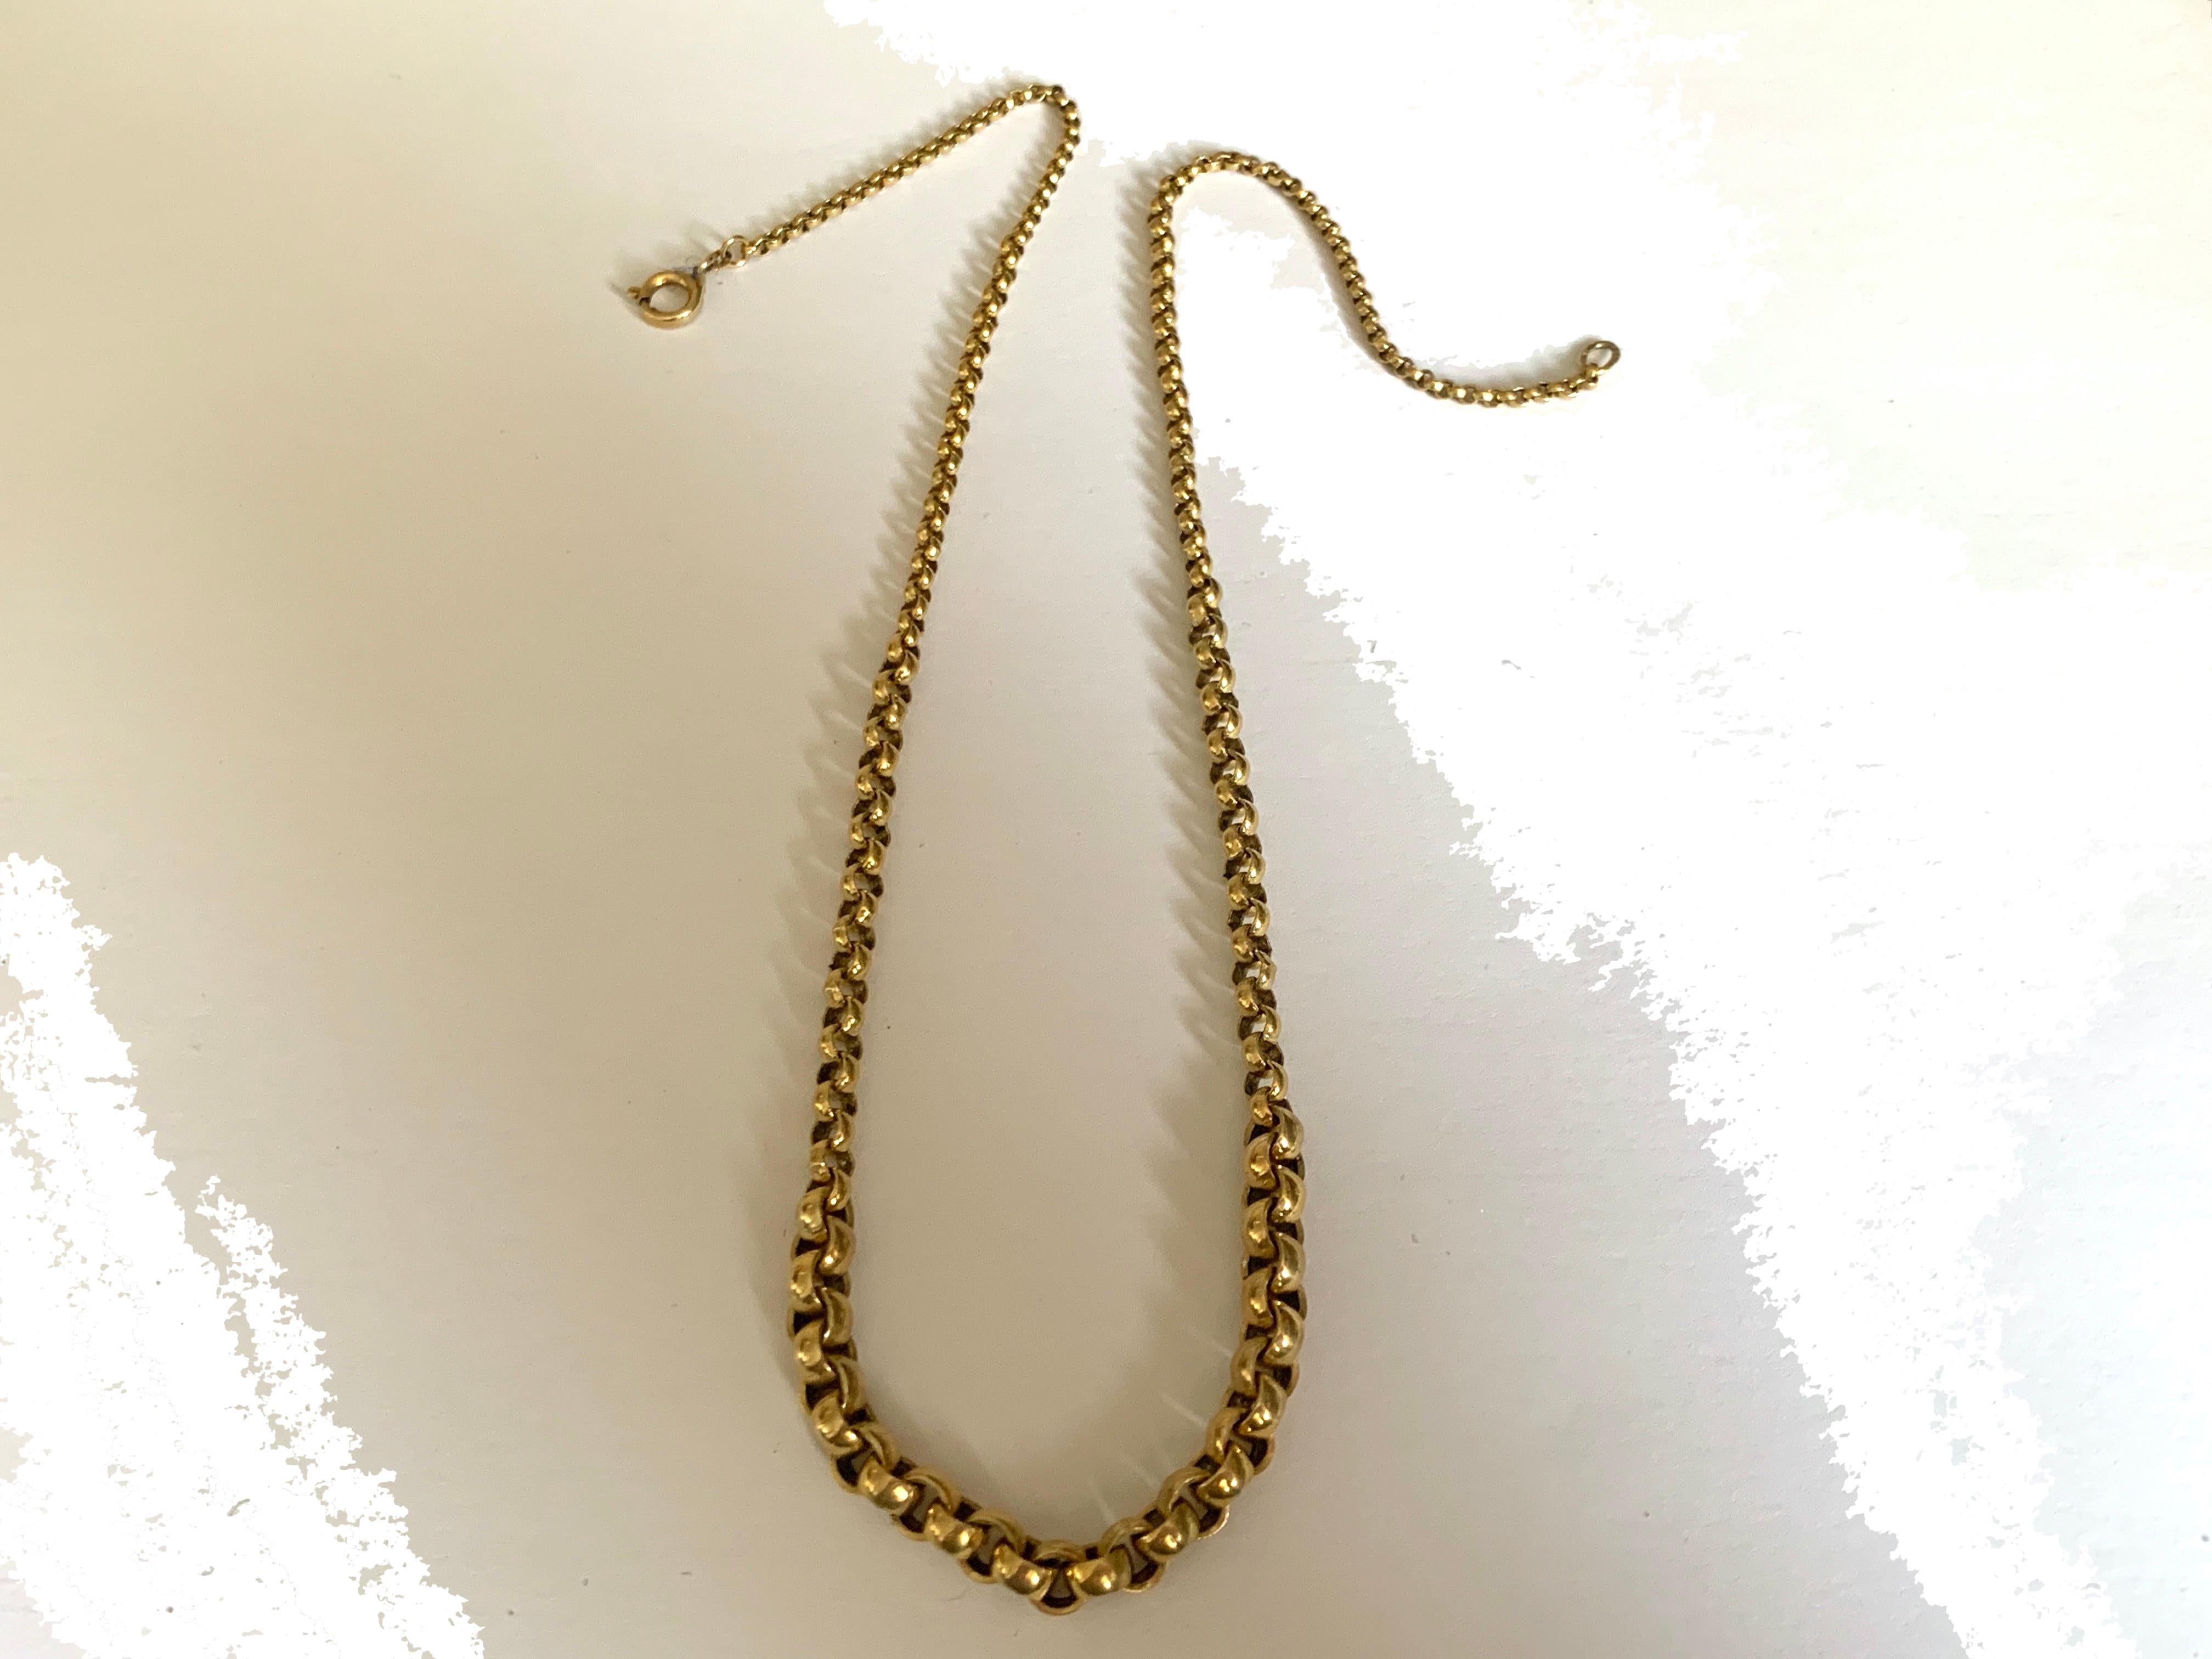 9ct 375 Gold Vintage Necklace 

Weighty Luxuriously smooth and  timeless 
Graduating Rolo link designed Chain / Necklace

This is a timeless piece of Jewellery made from superior gold
Gold has amazing depth of continuous bright gold colour truly